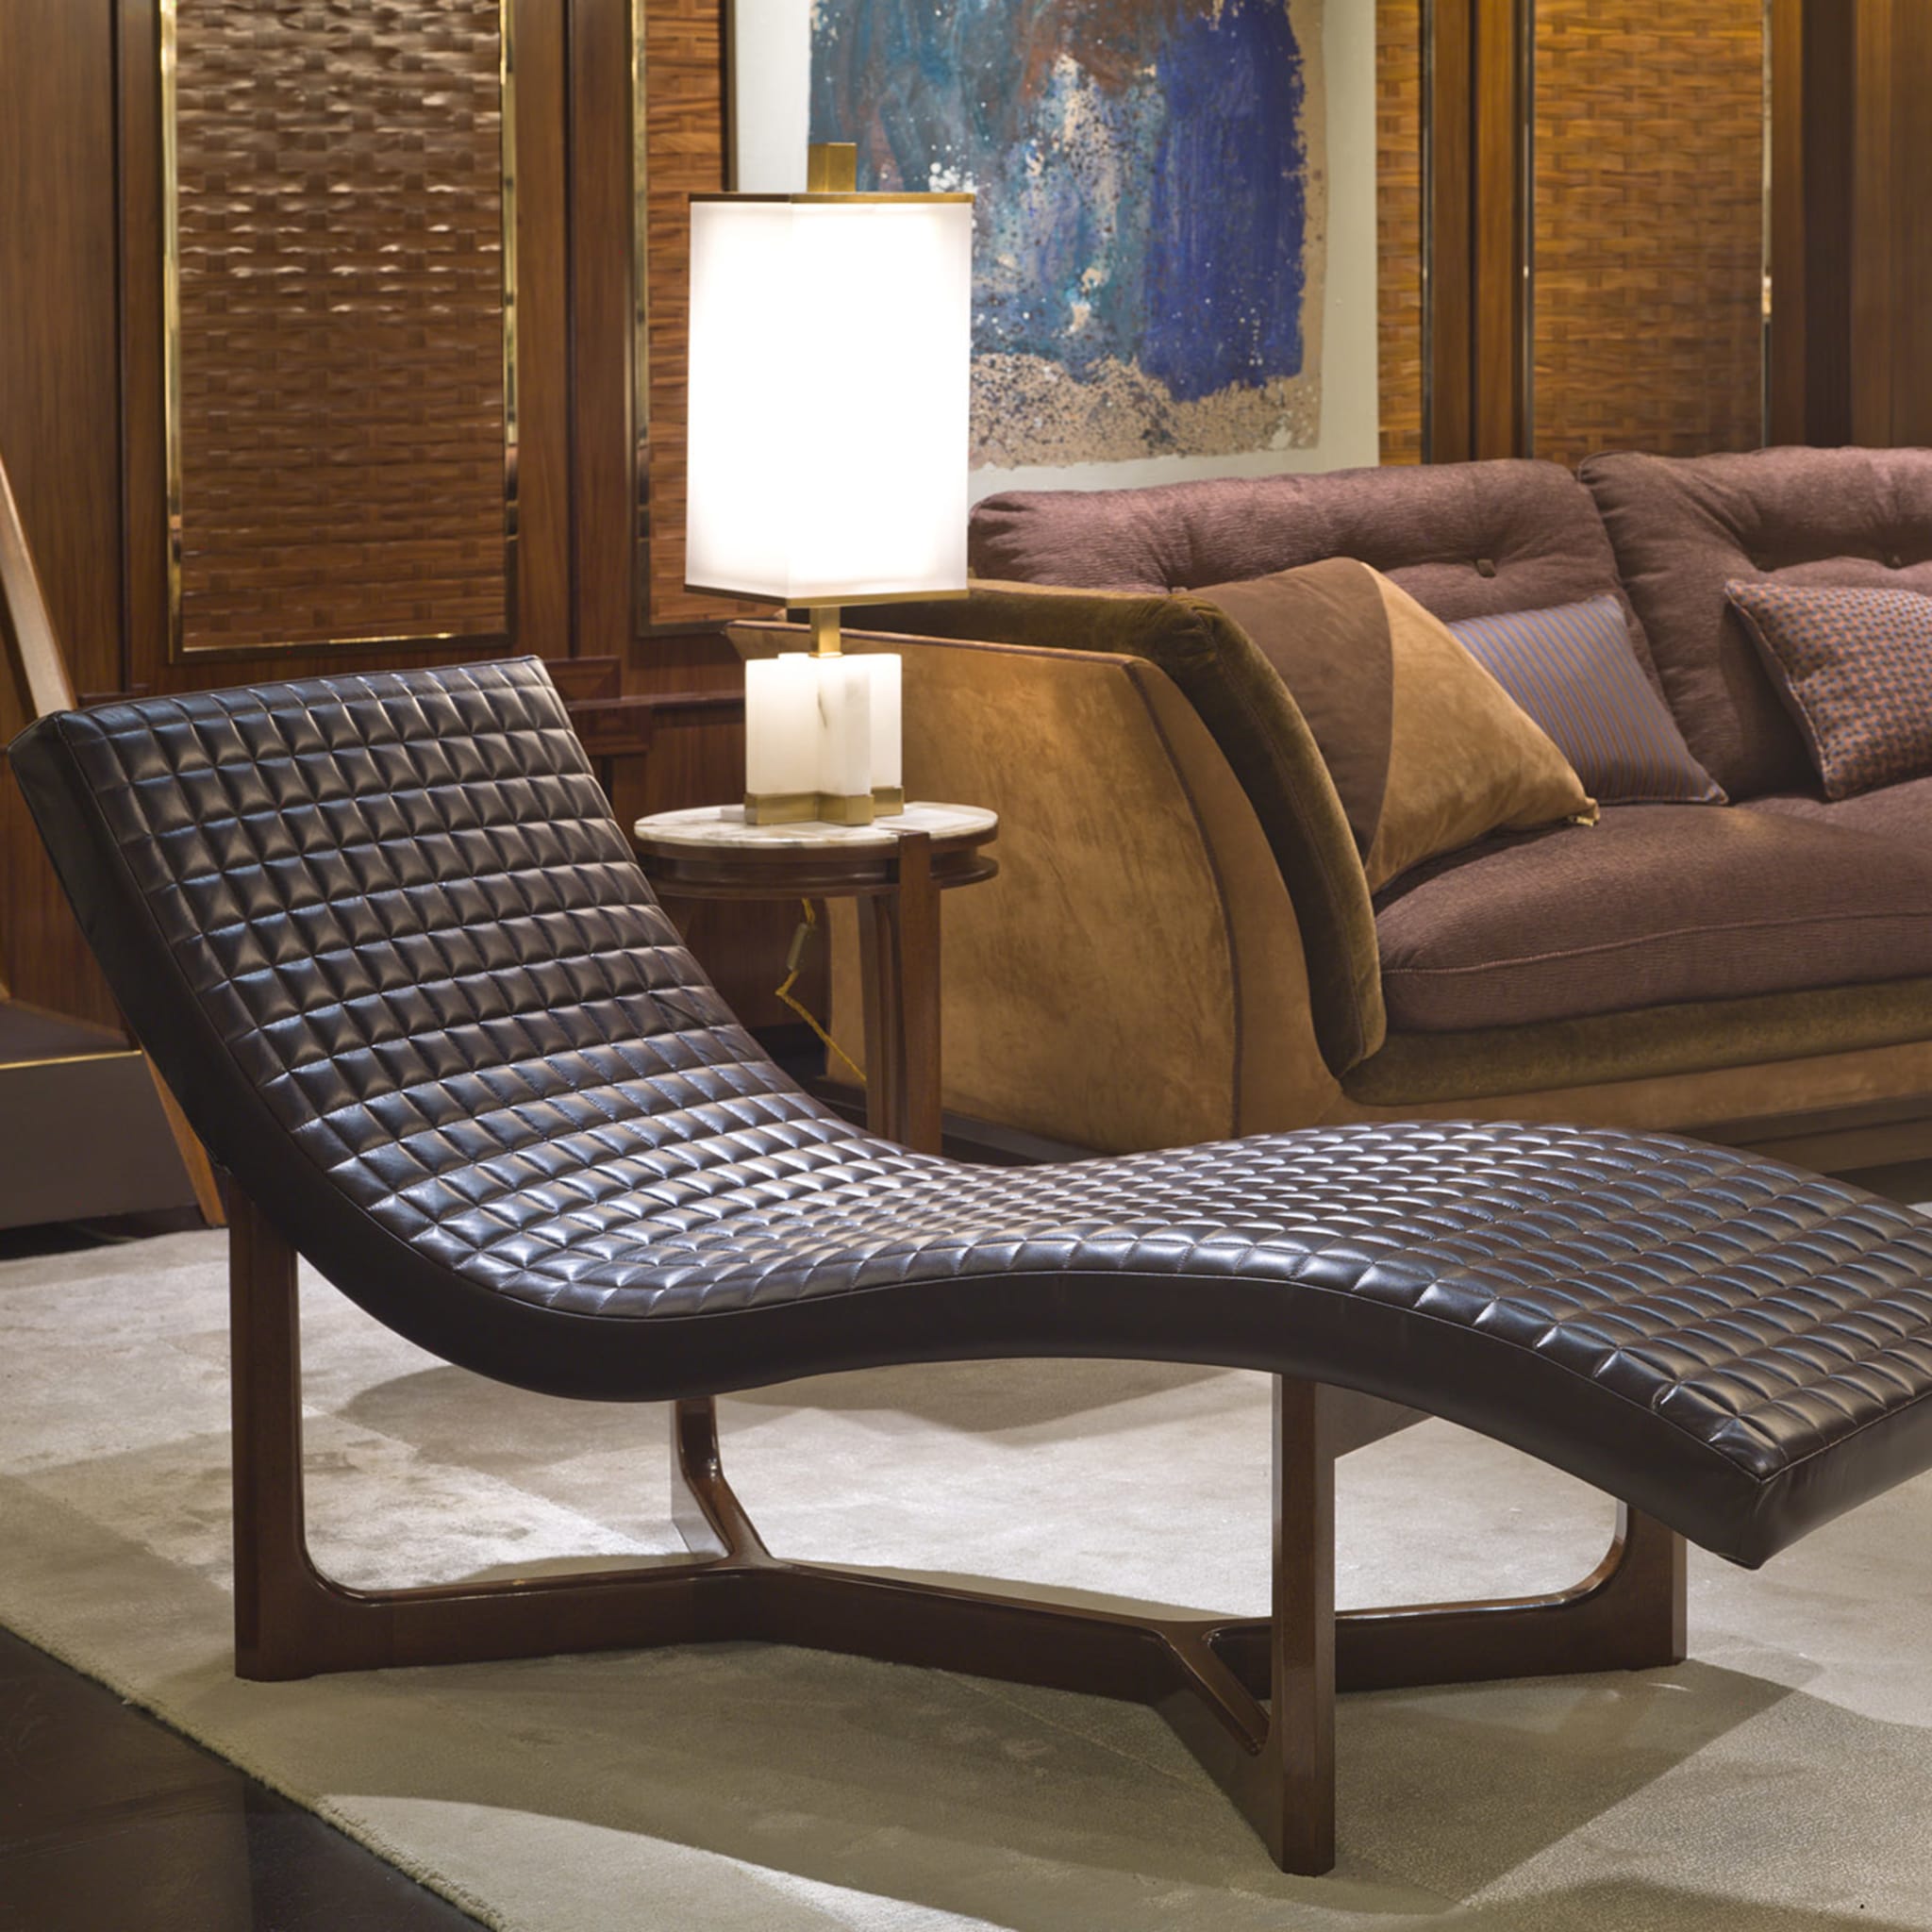 Leather and Mahogany Chaise Longue - Alternative view 3